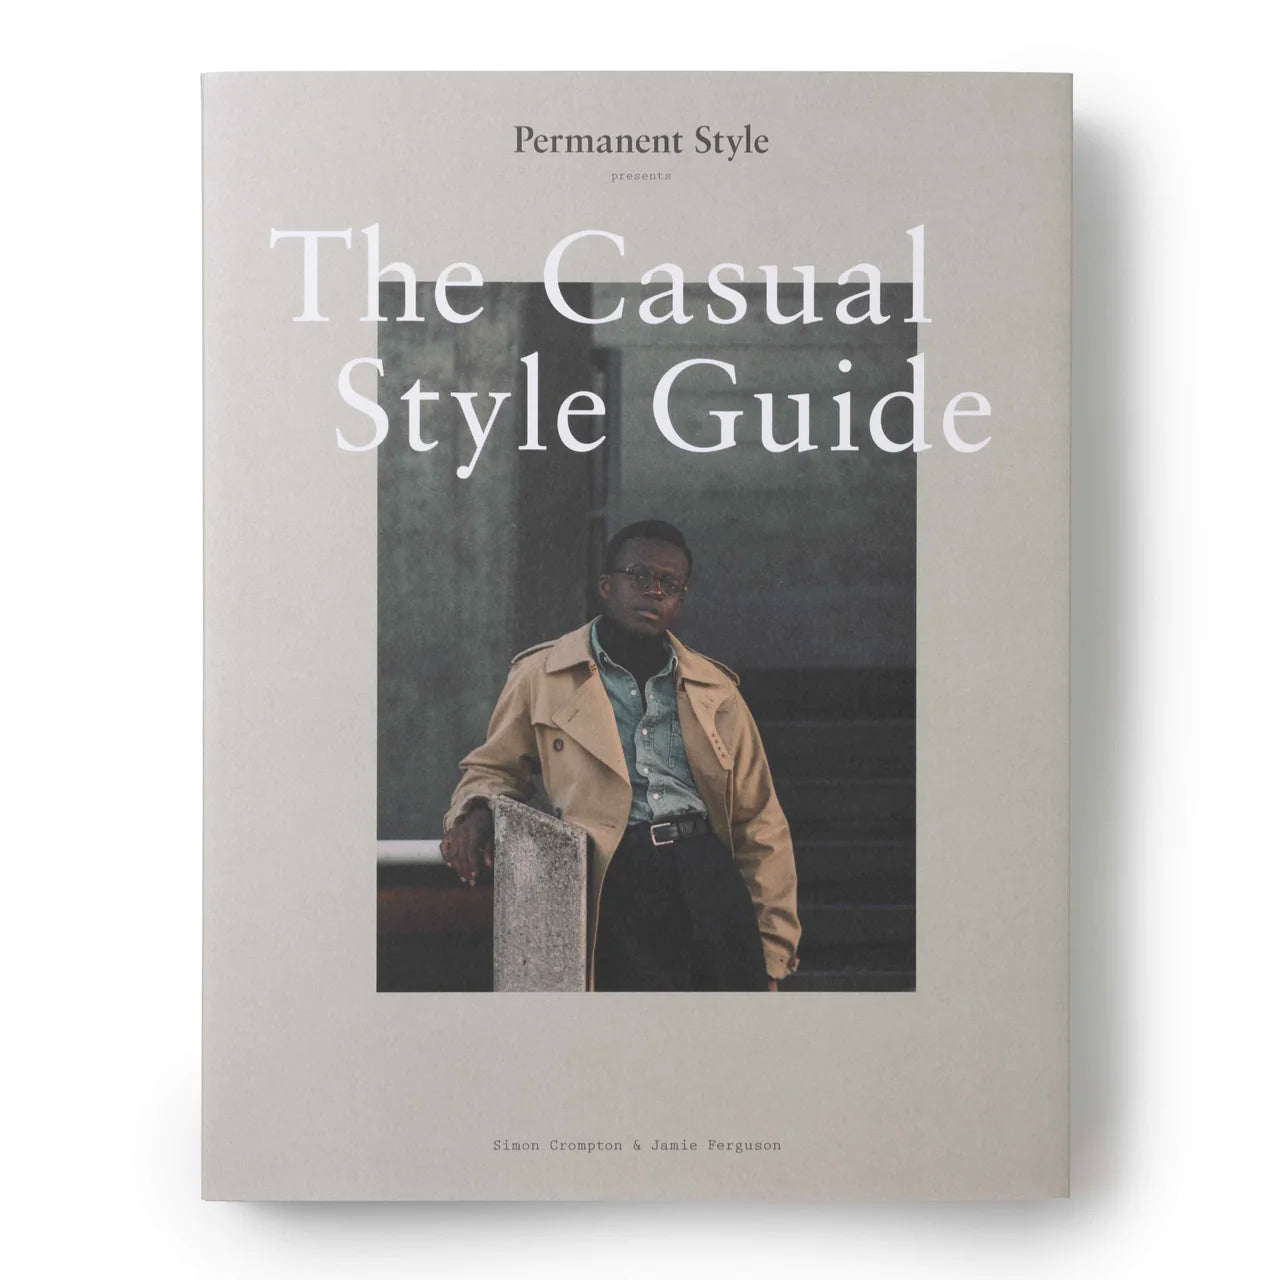 The Casual Style Guide